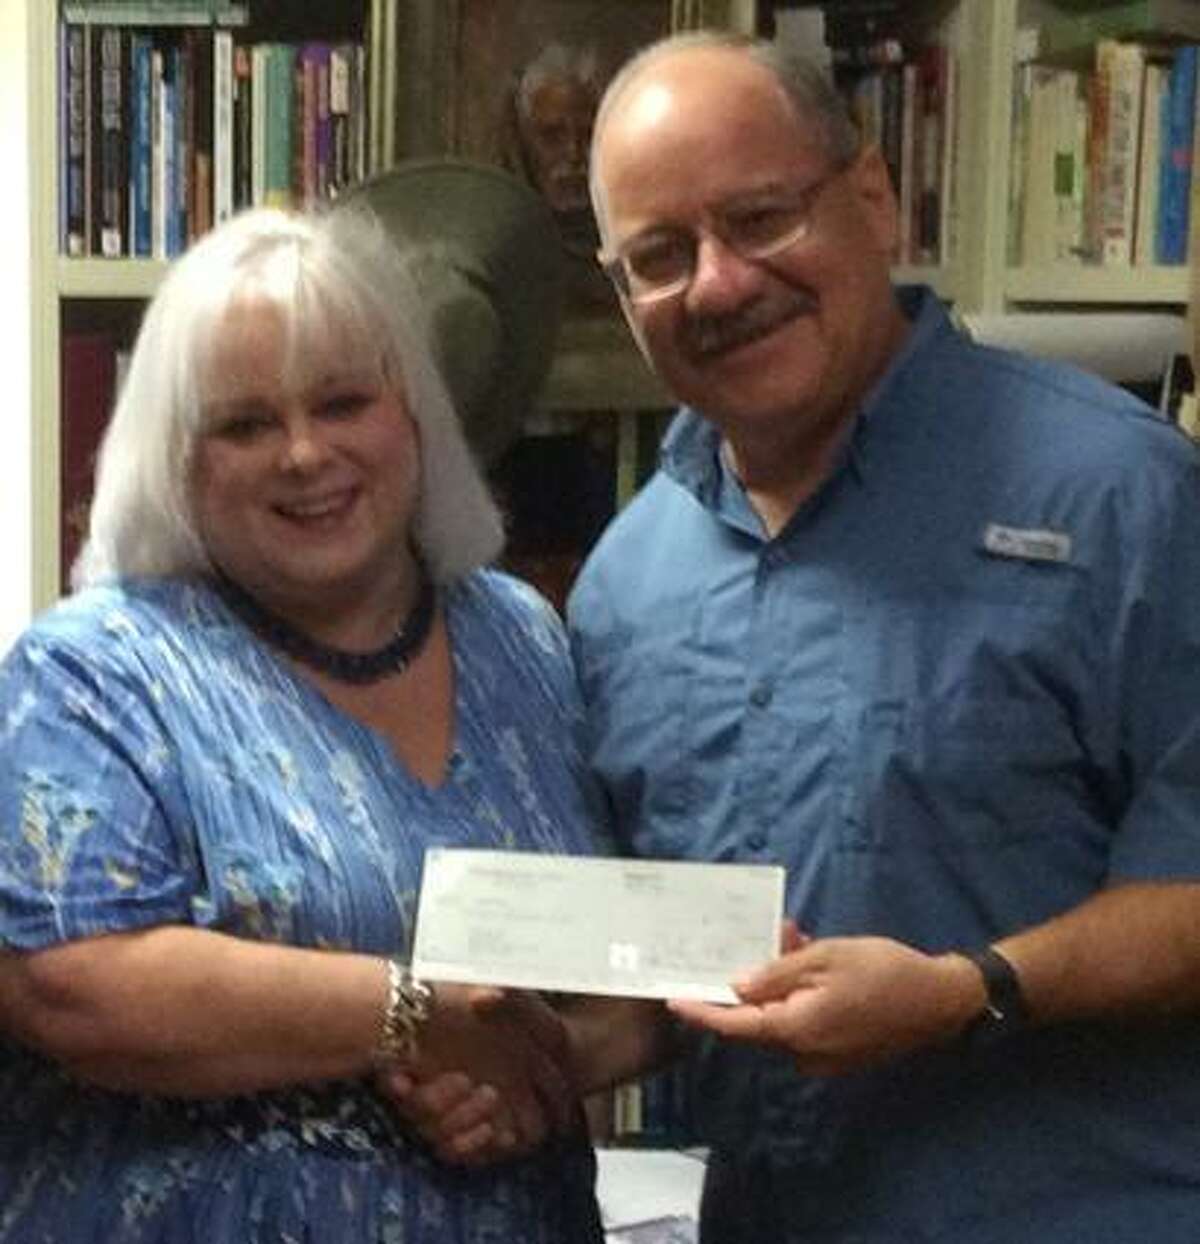 Kingsland Baptist Church is among the sponsors of Operation Back 2 School this year. Rhonda Player, Compassion Katy director of marketing, received a sponsorship check from Missions Pastor Omar Garcia.